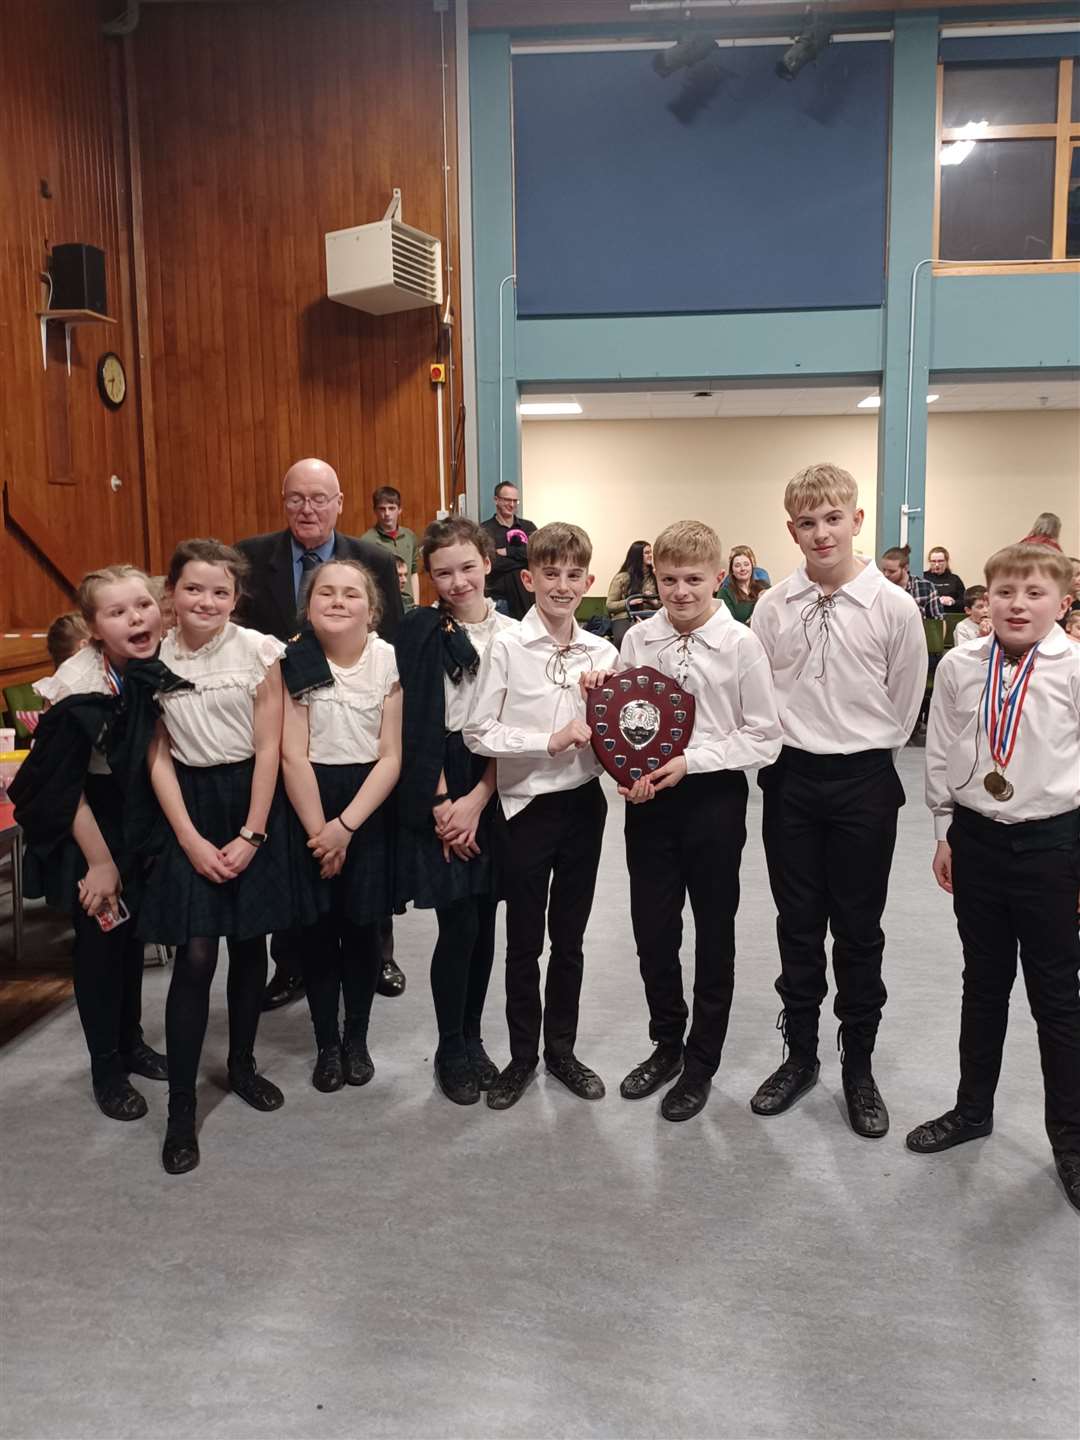 Lairg Primary School won the Small Schools trophy.